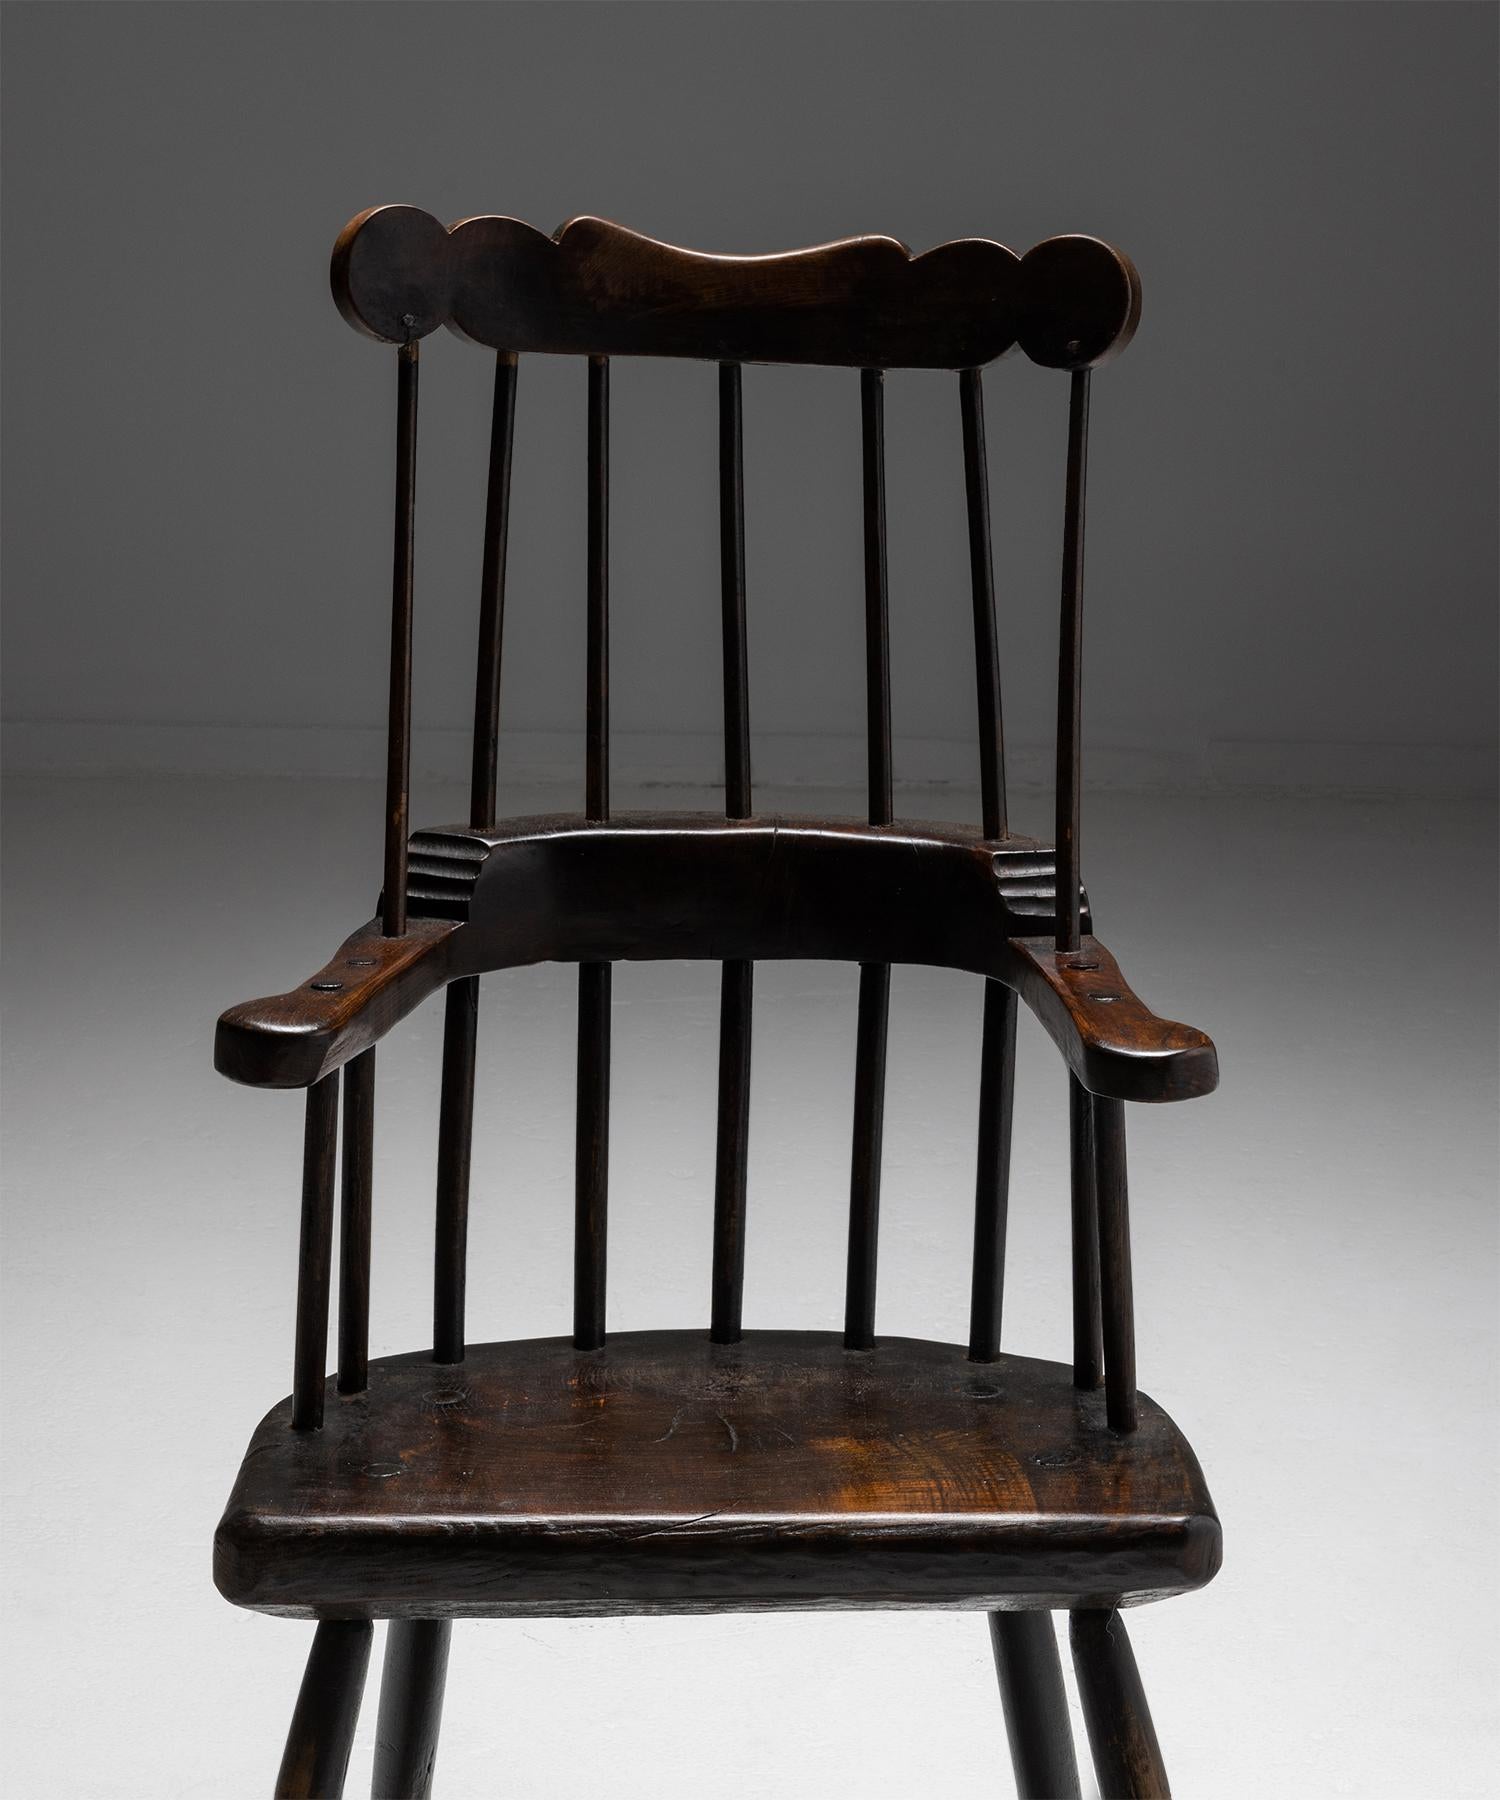 Comb-back windsor

Wales circa 1860

Carved wooden frame with spindle back and slab seat. Beautiful dark patina.

Measures: 22.5”W x 20”D x 41”H x 16”seat.